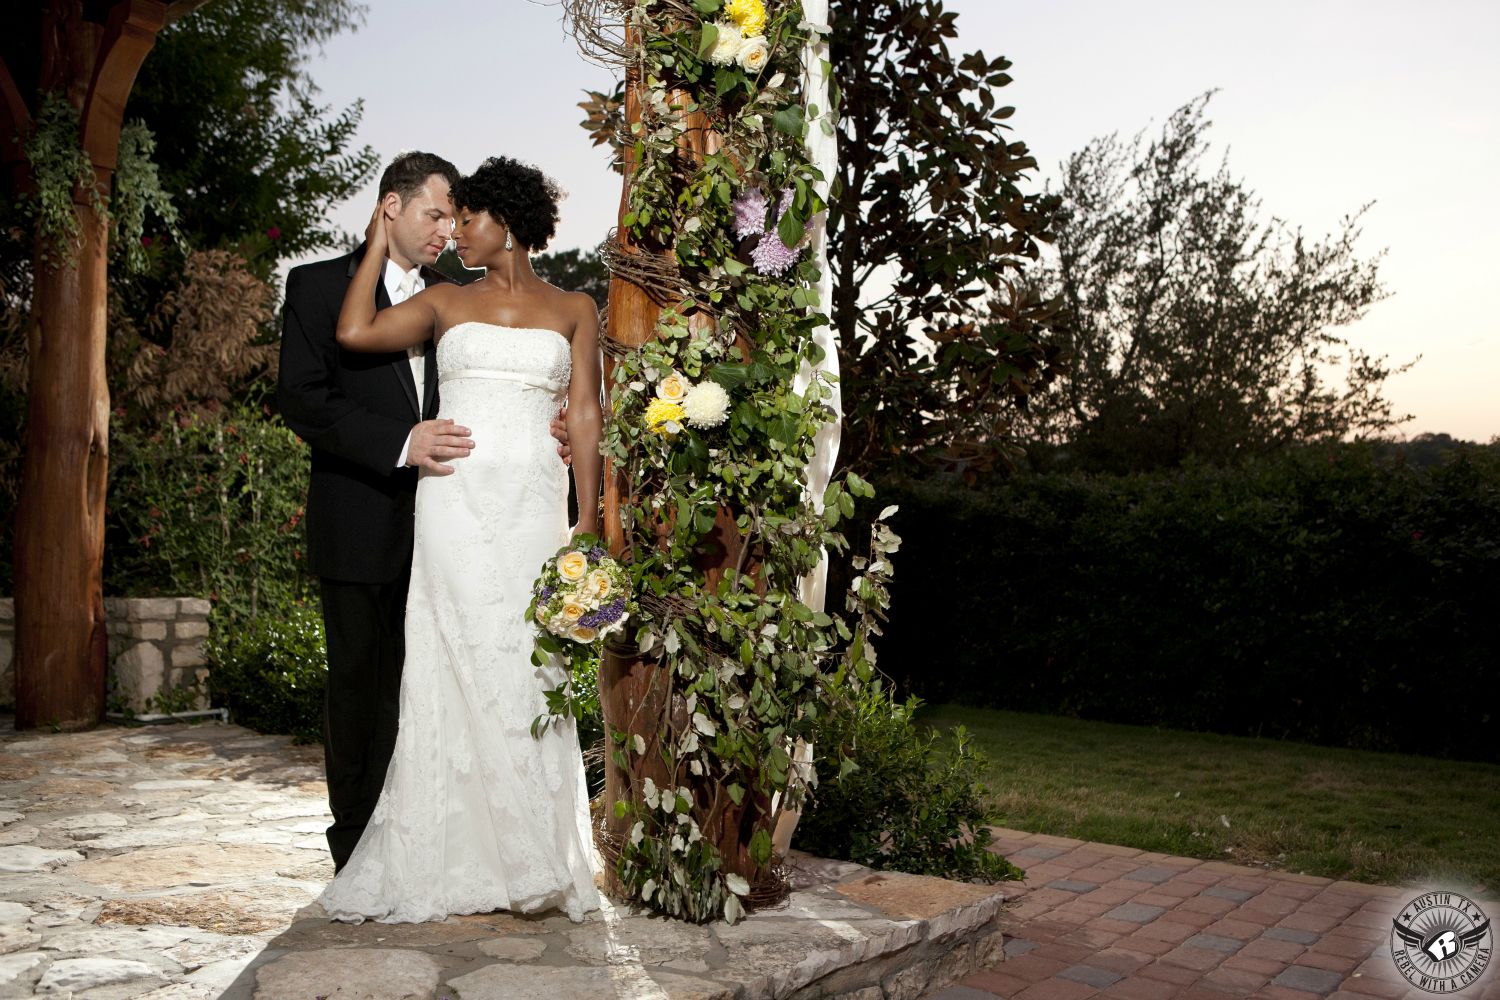 Bride in strapless white wedding dress with exquisite bouquet by Visual Lyrics Floral Artistry Austin wedding florist and groom in black tuxedo embrace under the wedding ceremony arbor at Nature's Point Austin wedding venue on the shores of Lake Travis.